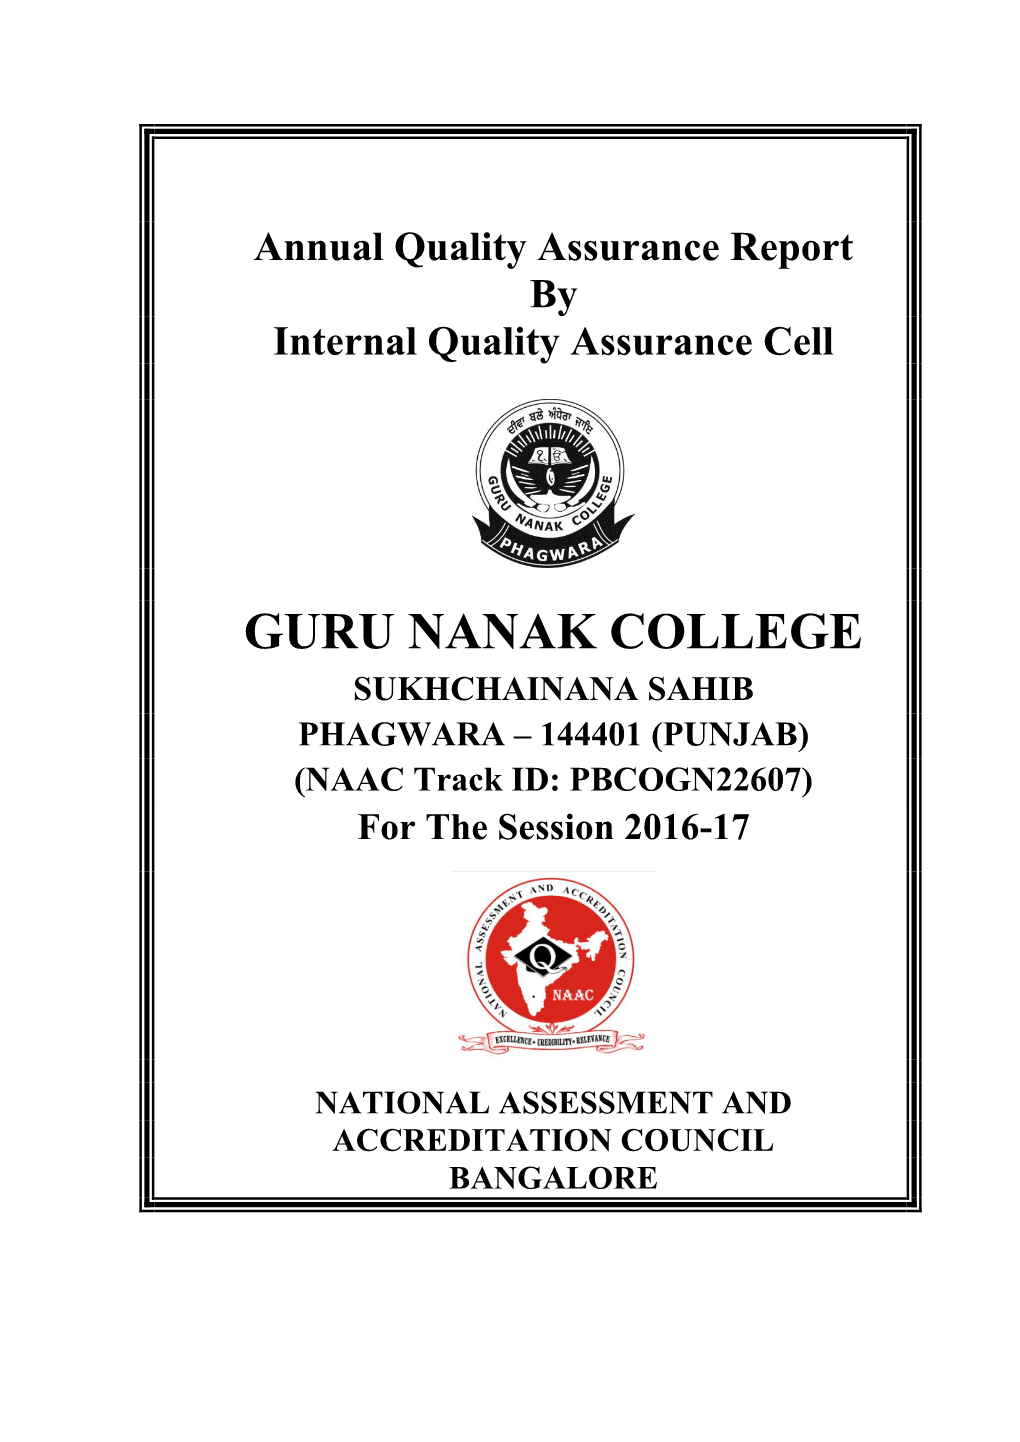 Annual Quality Assurance Report for the Session 2016-17